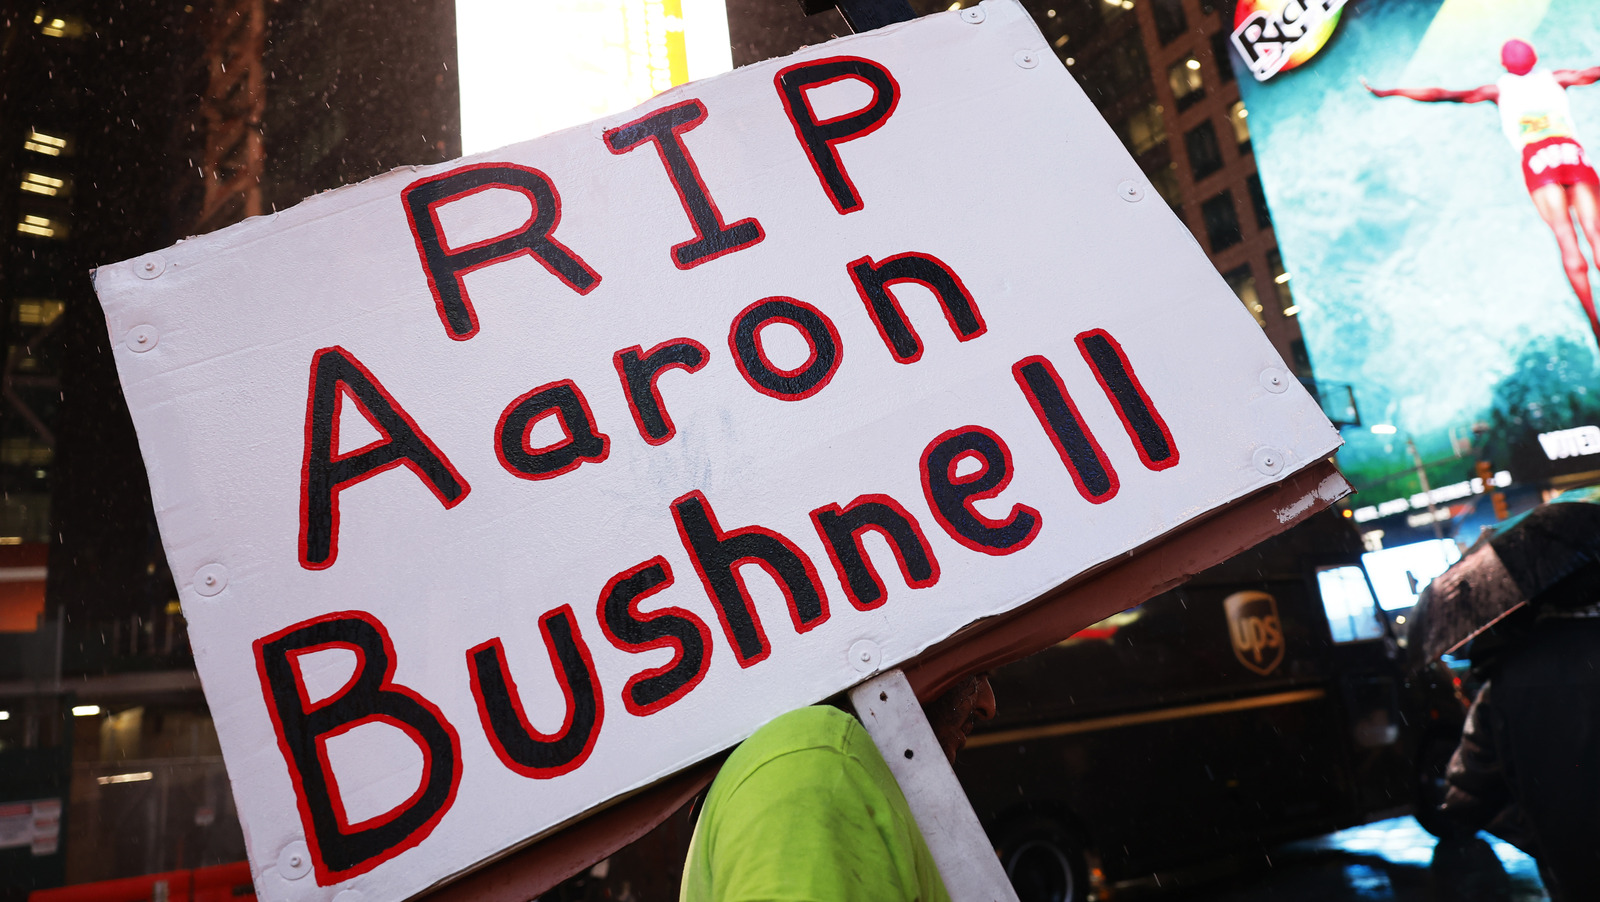 The Grim Final Words Of Aaron Bushnell, The Airman Who Self-Immolated